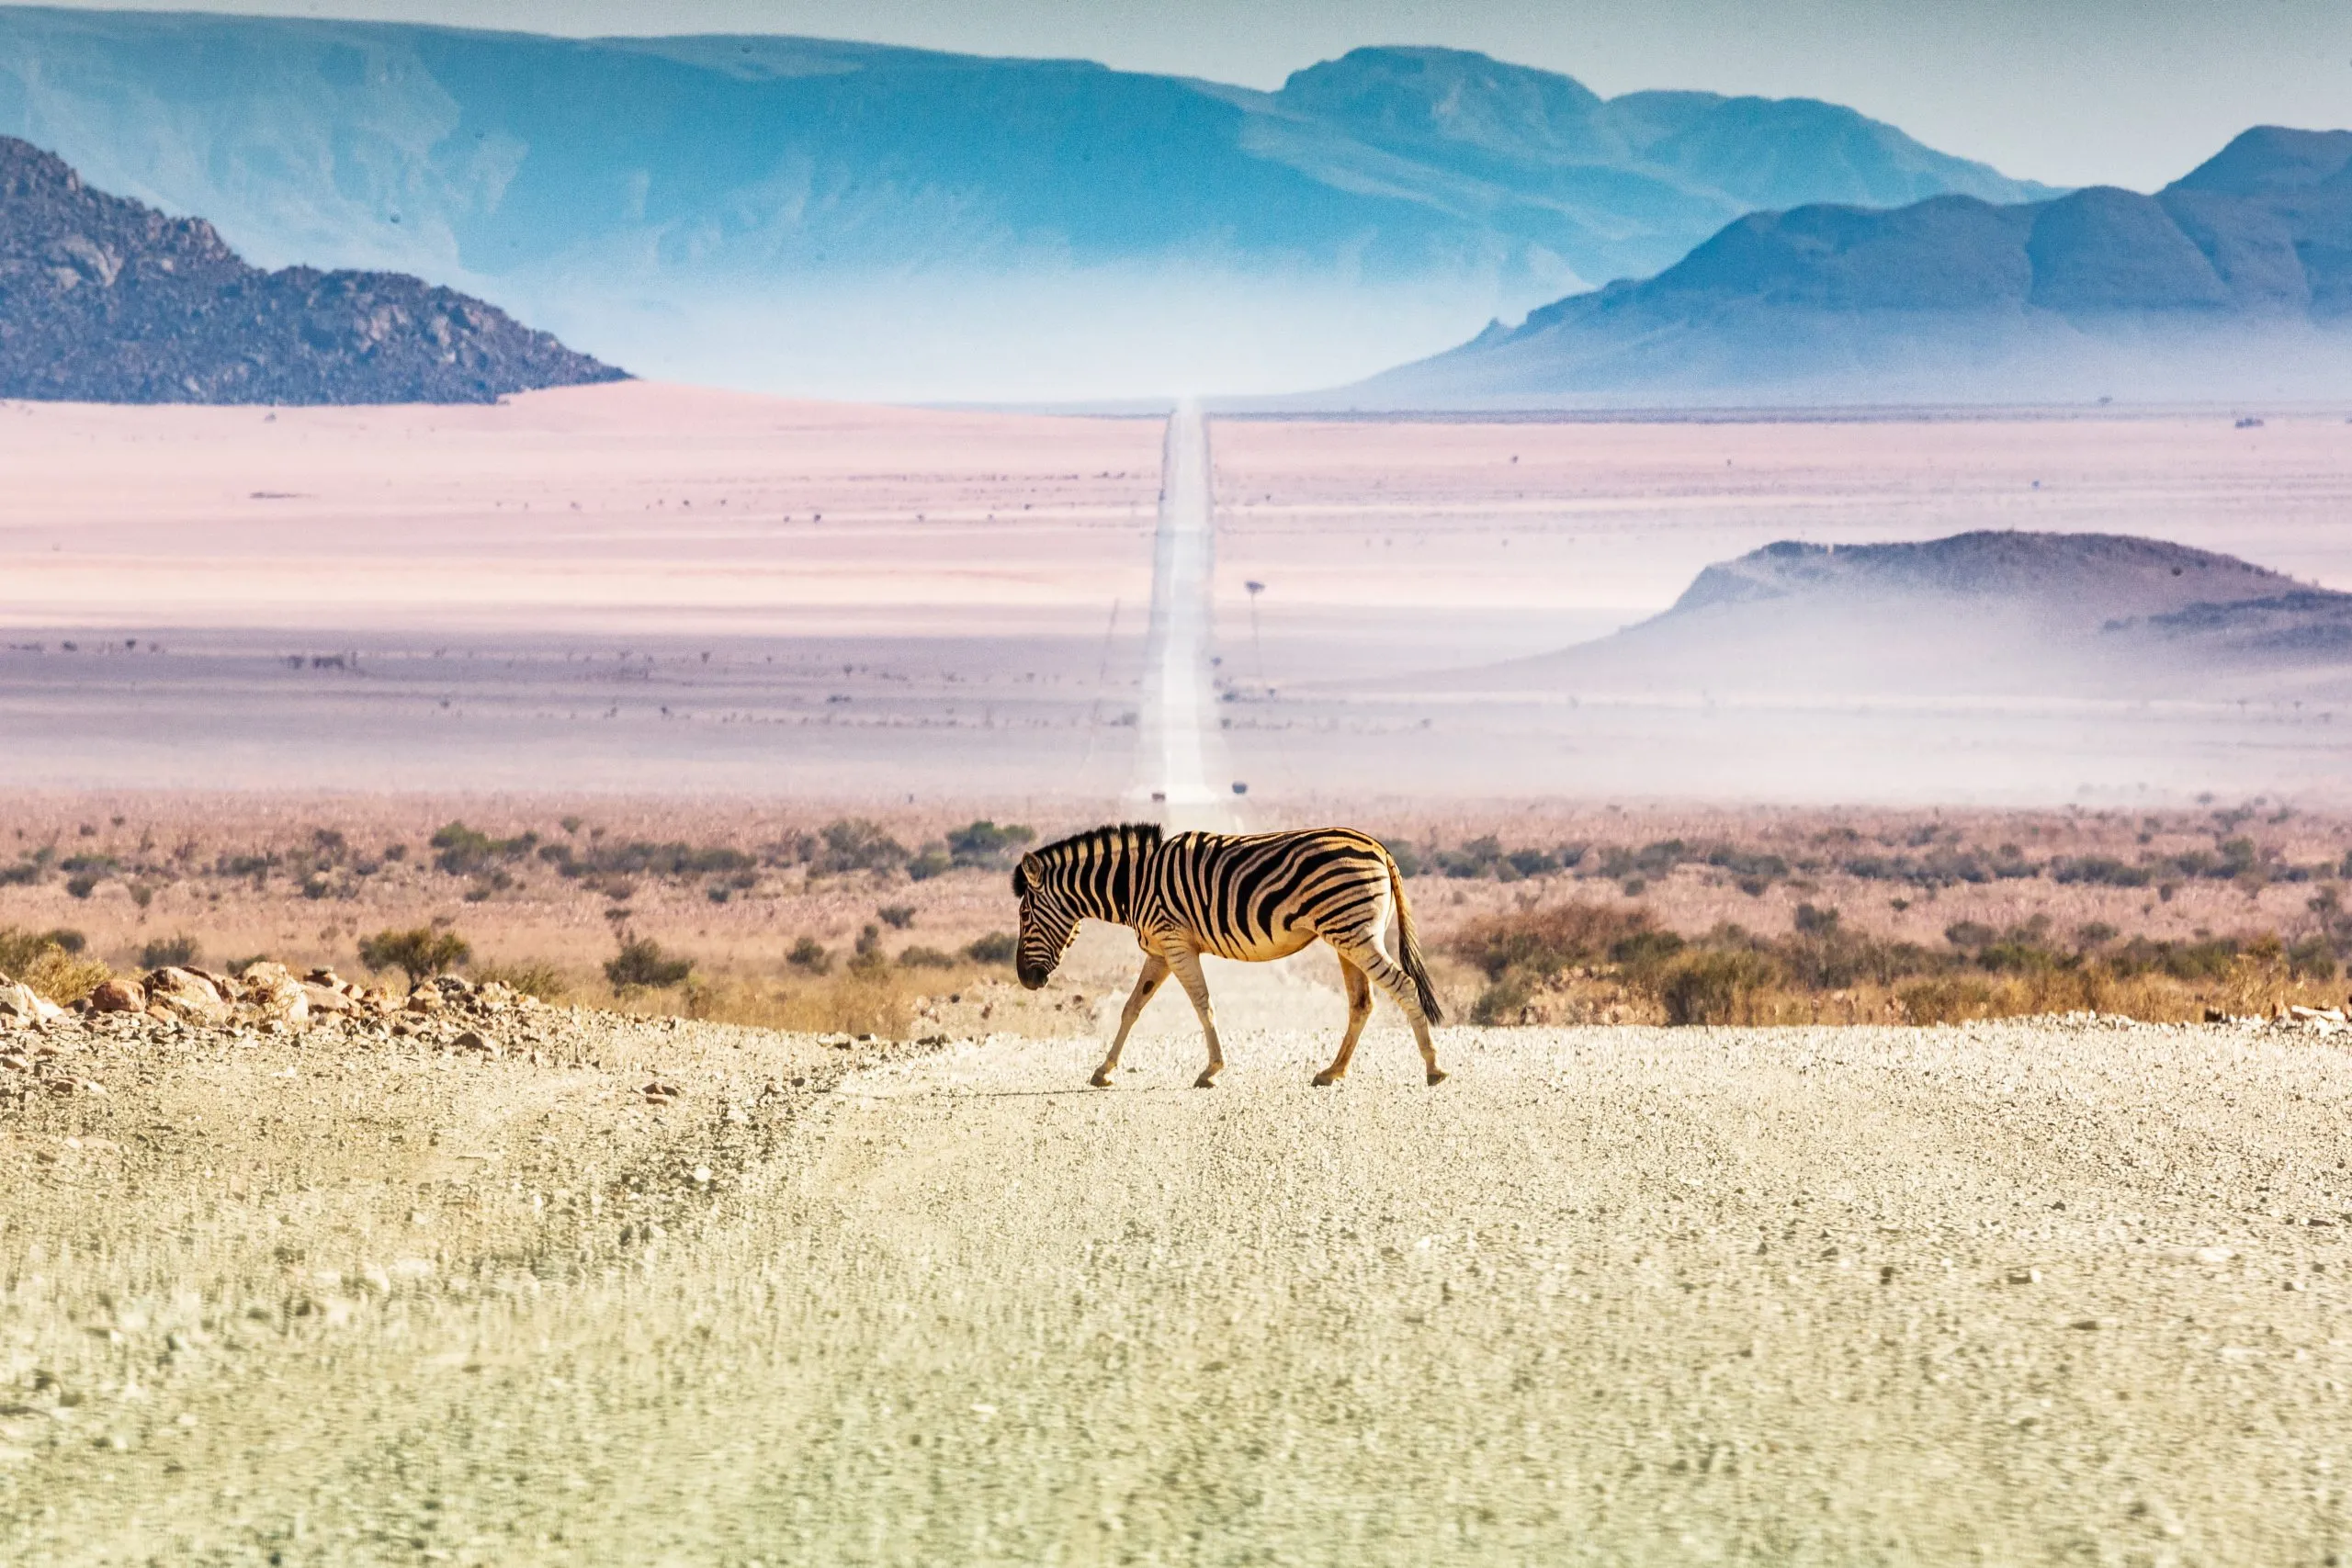 Zebras crossing the road, Namibia, Africa